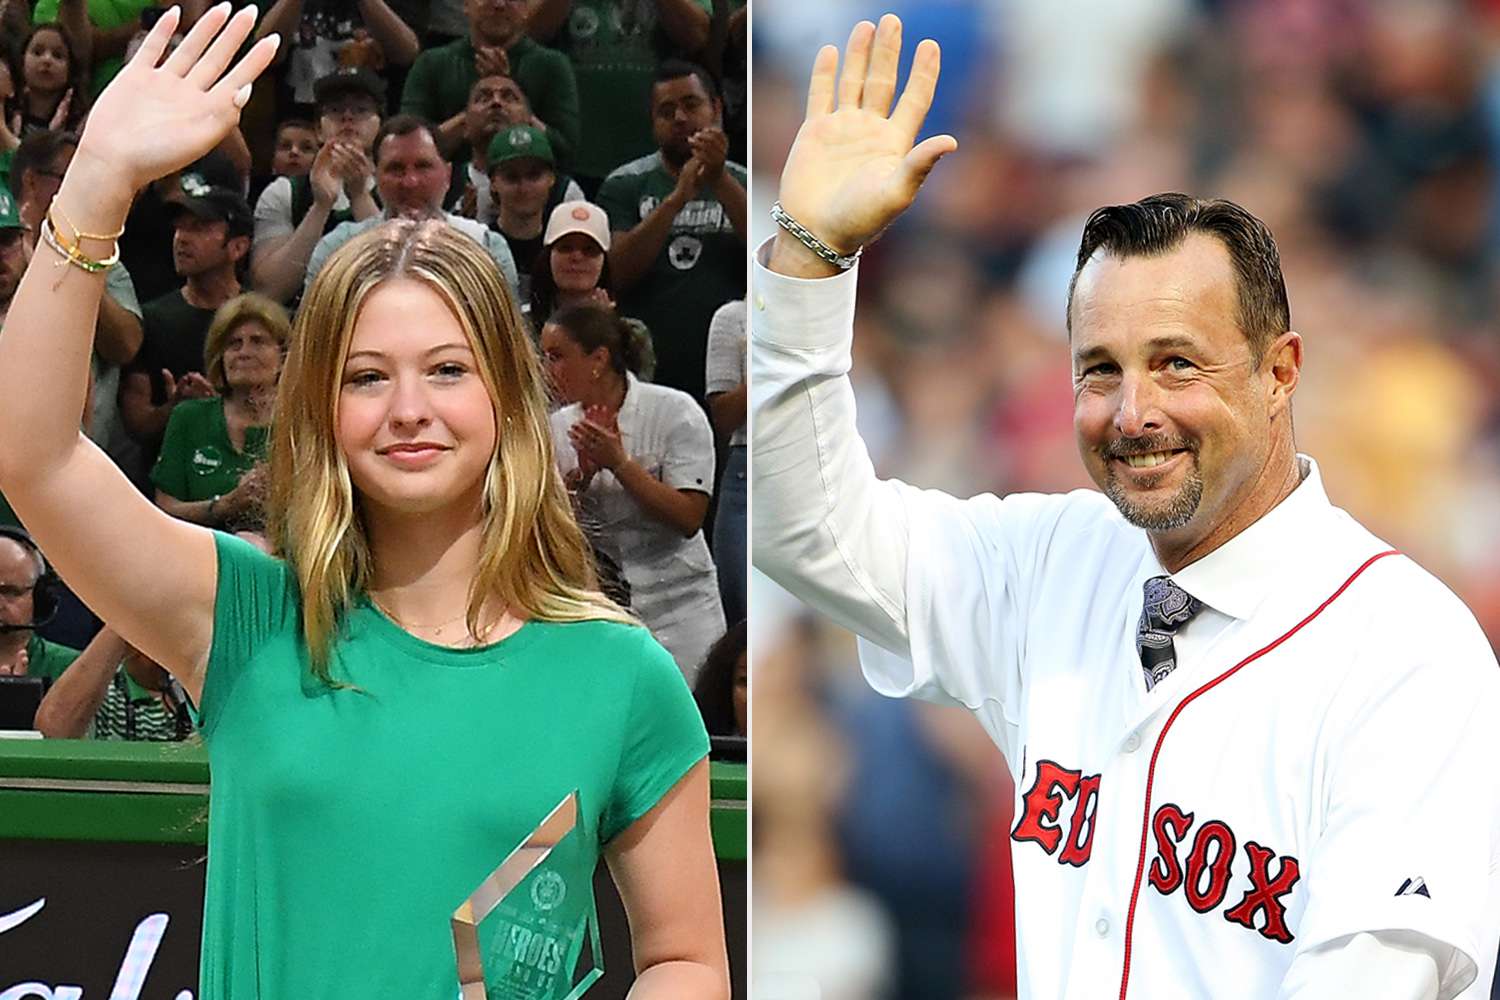 Late Tim Wakefield Honored at Celtics NBA Championship Game as His Teen Daughter Accepts on His Behalf